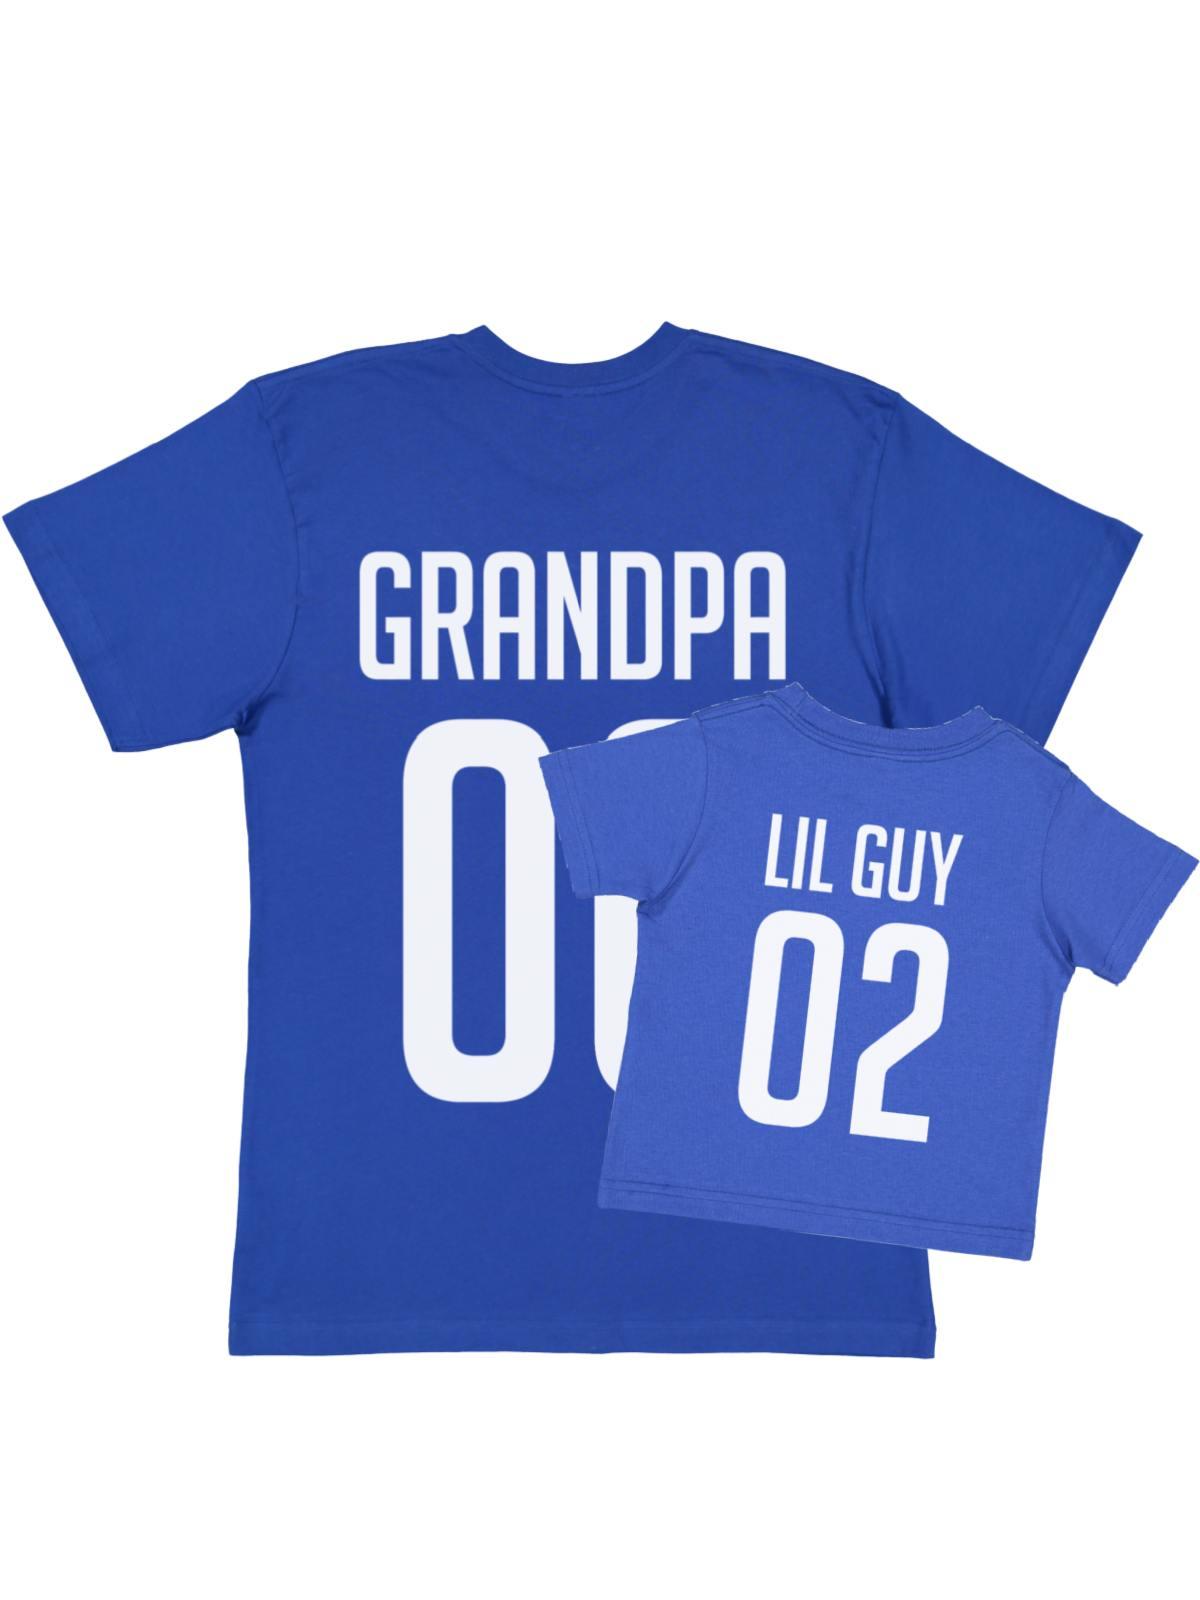 Grandpa and Me Matching Father's Day Shirts in Royal Blue